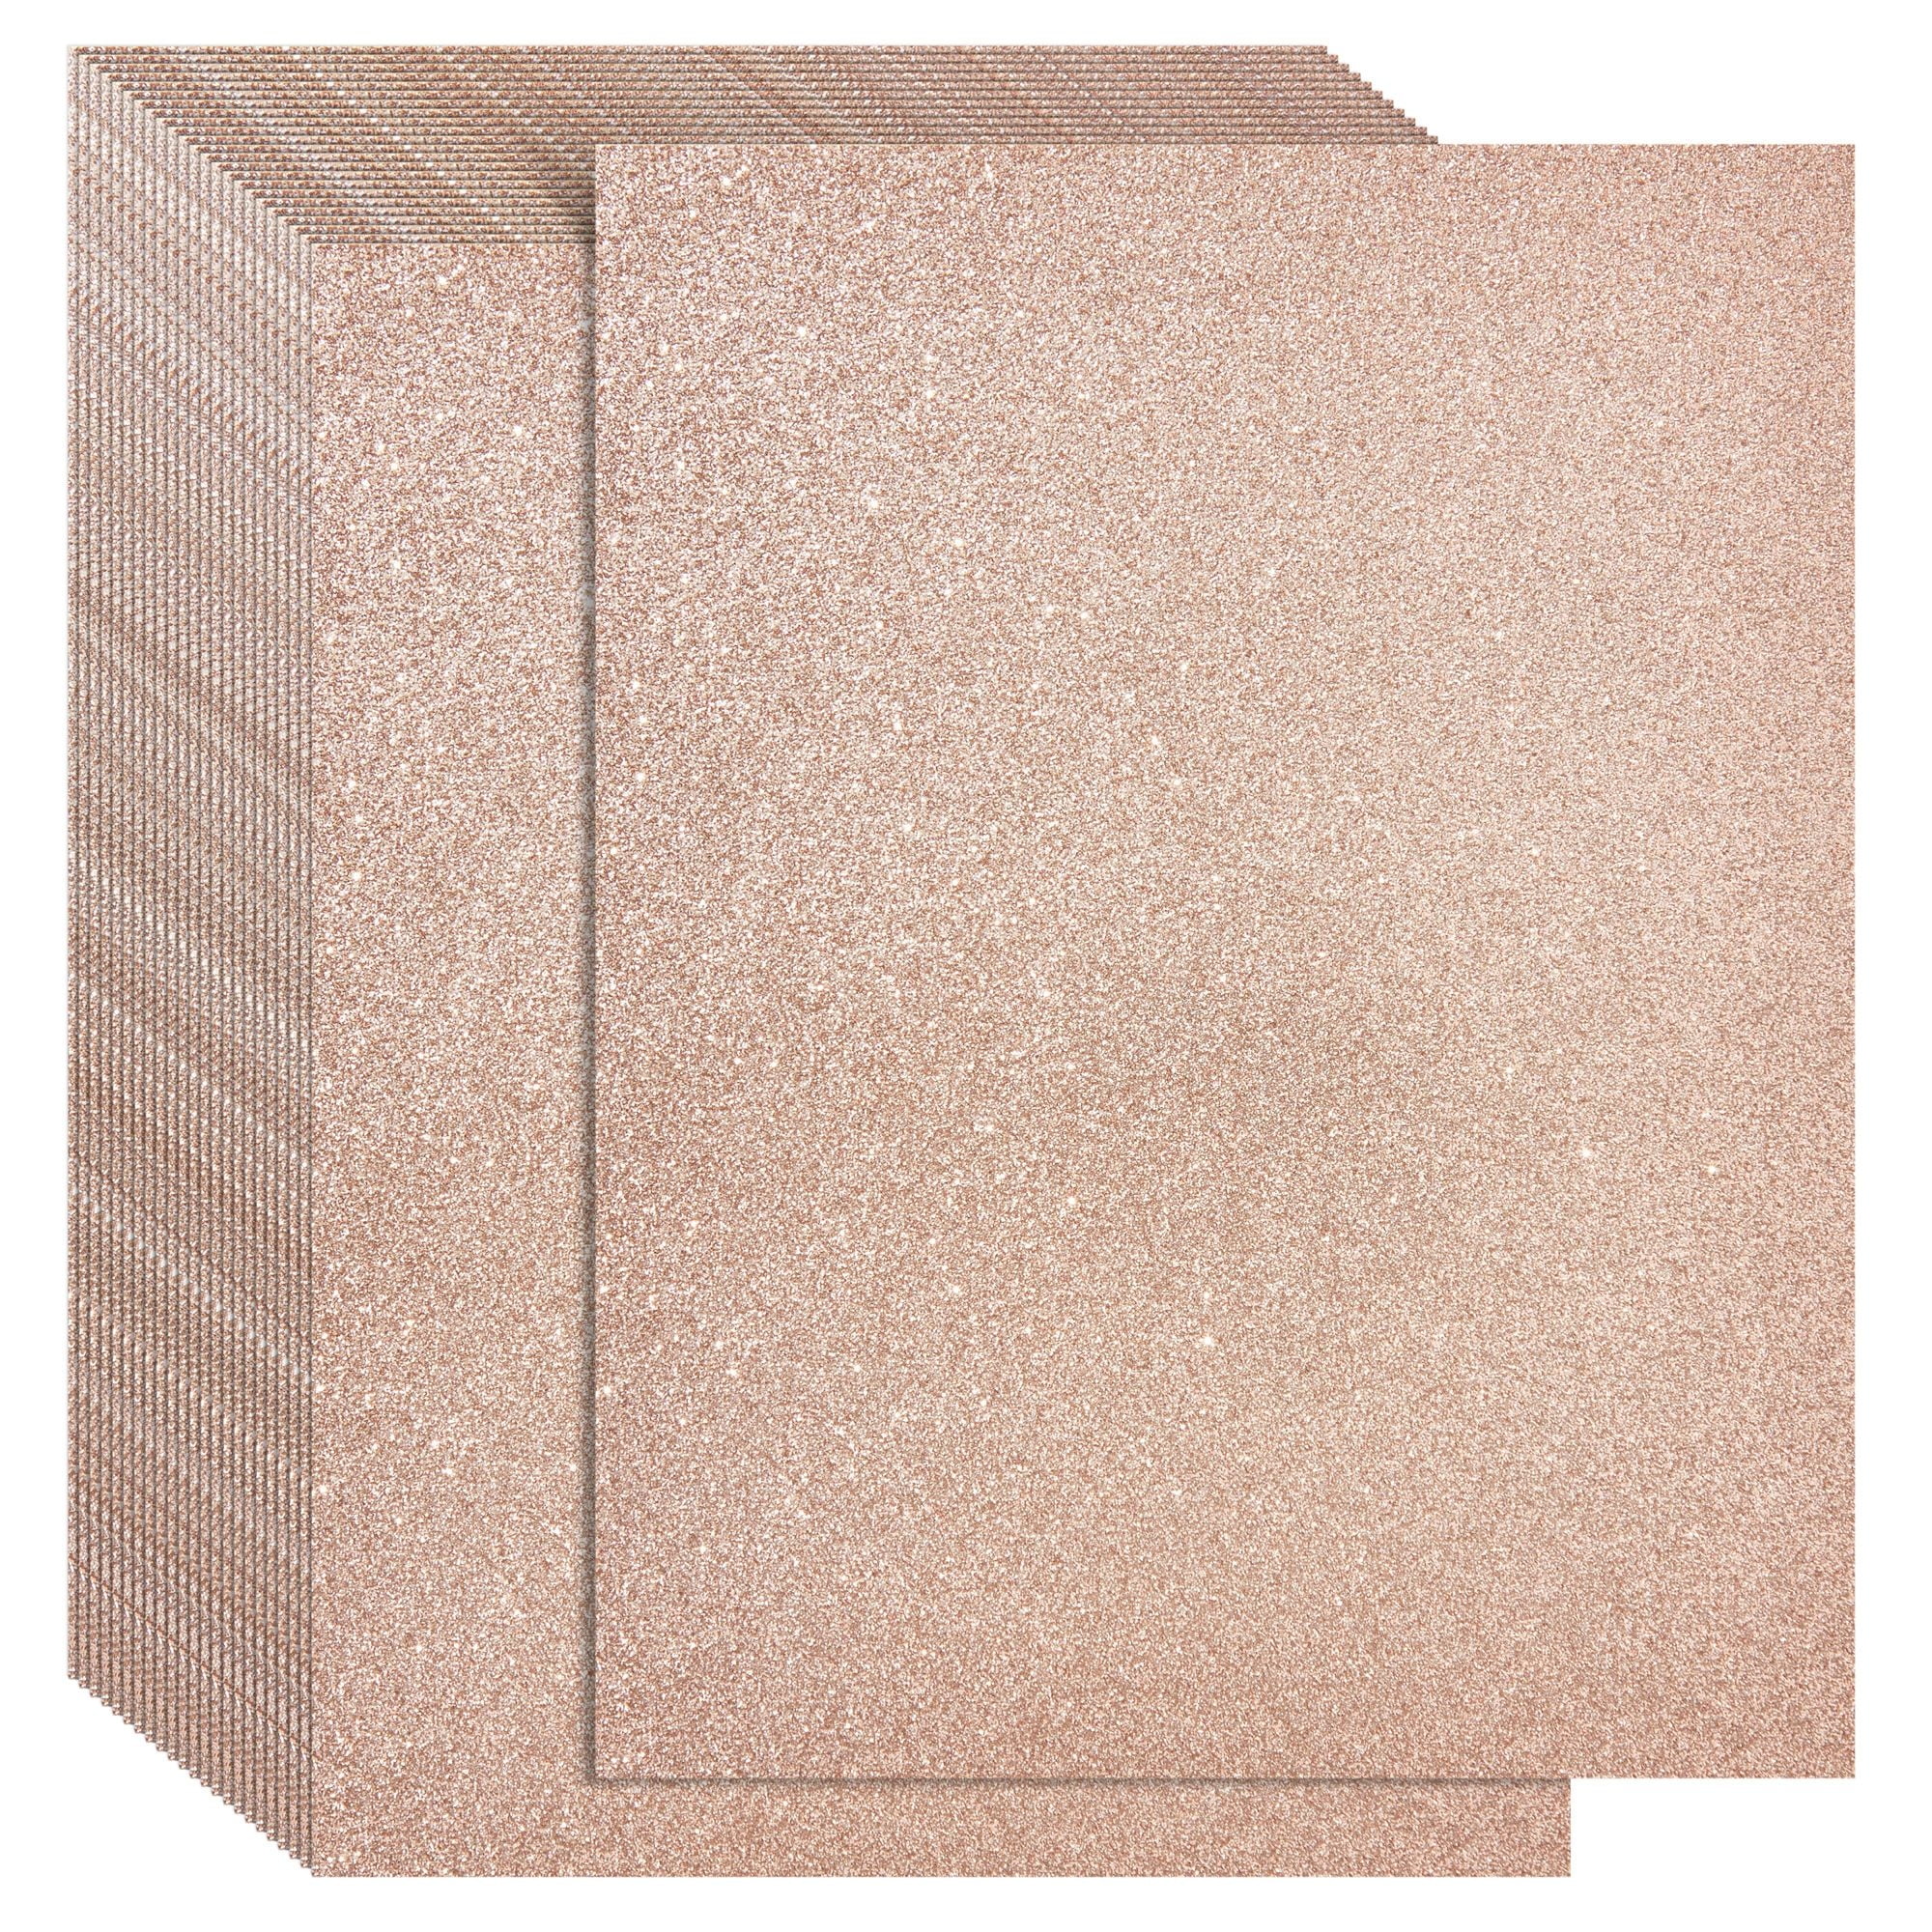 Glitter Cardstock Paper for DIY Crafts (8.5 x 11 In, 24 Sheets), PACK -  Mariano's